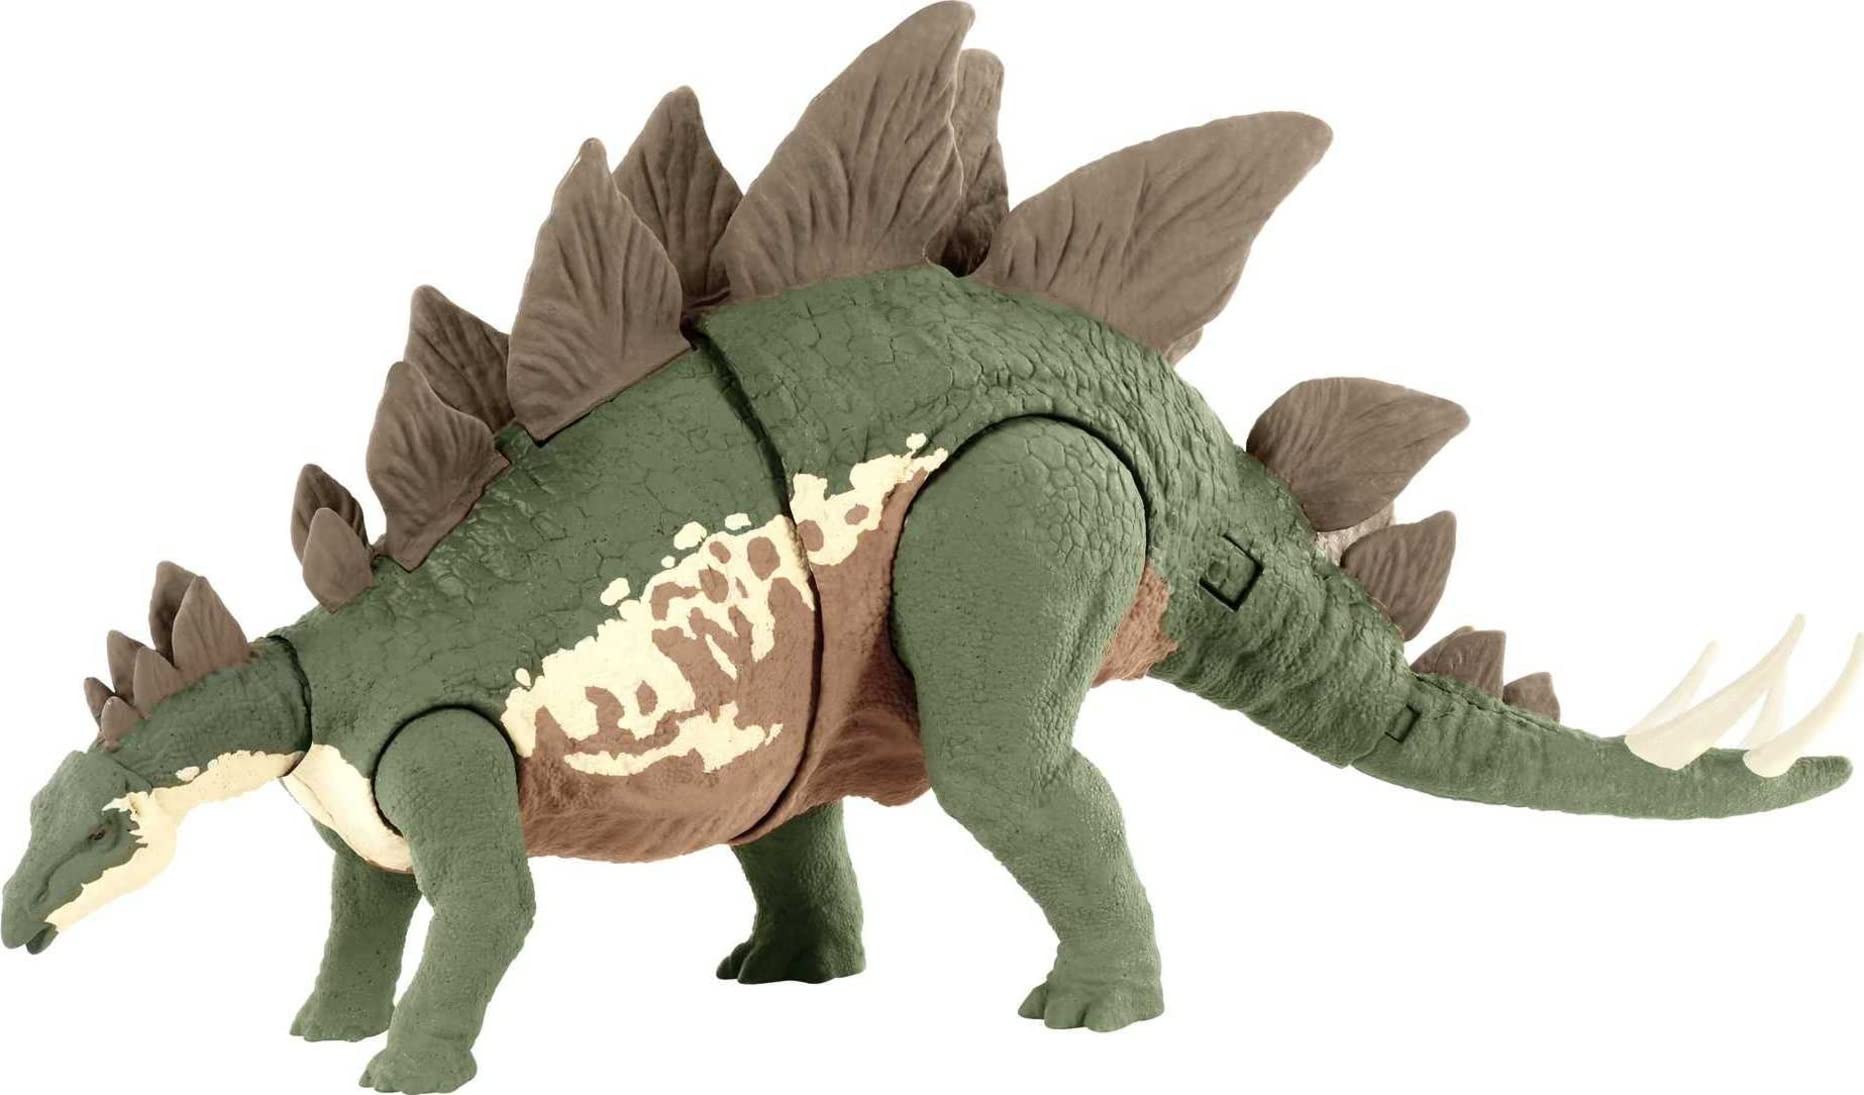 Jurassic World Toys Jurassic World camp cretaceous Mega Destroyers Stegosaurus Dinosaur Action Figure, Toy gift with Movable Joints, Attack and Brea